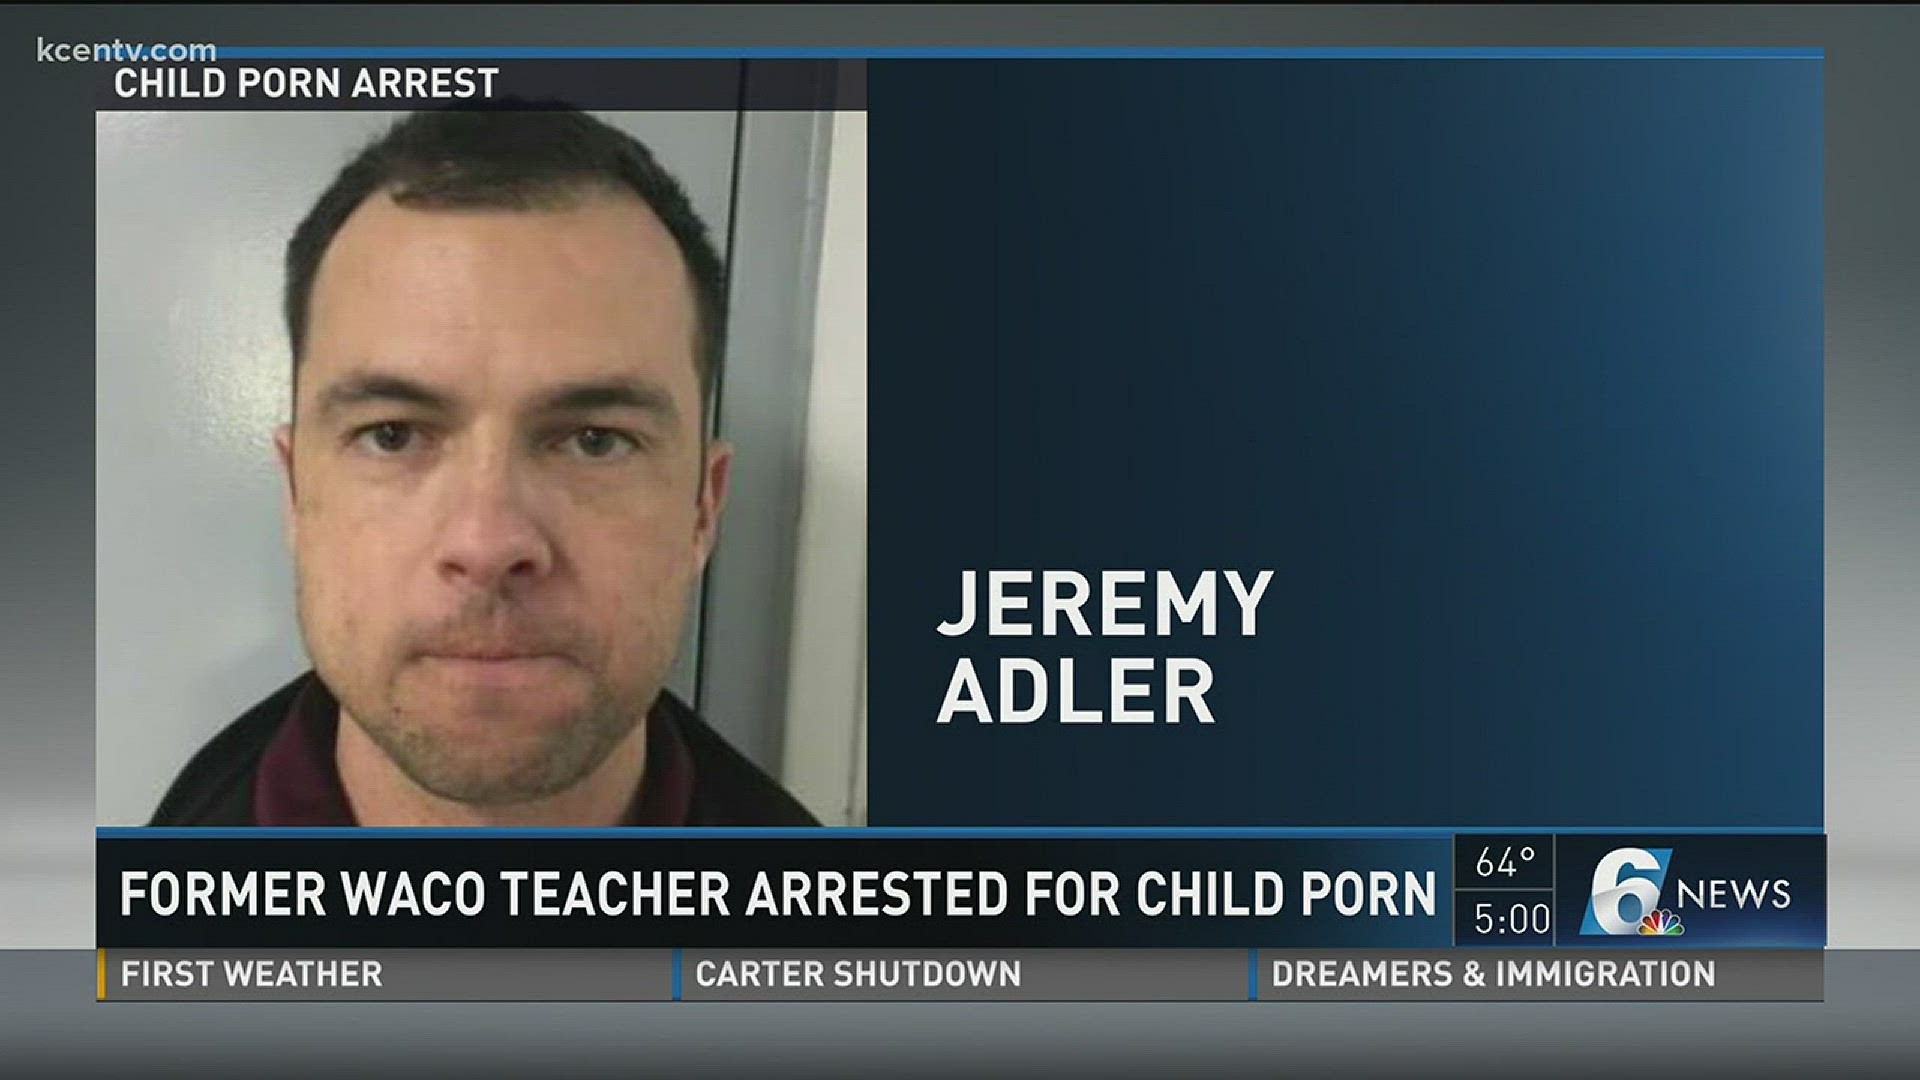 A Waco ISD teacher has resigned after being arrested for allegedly possessing child pornography.